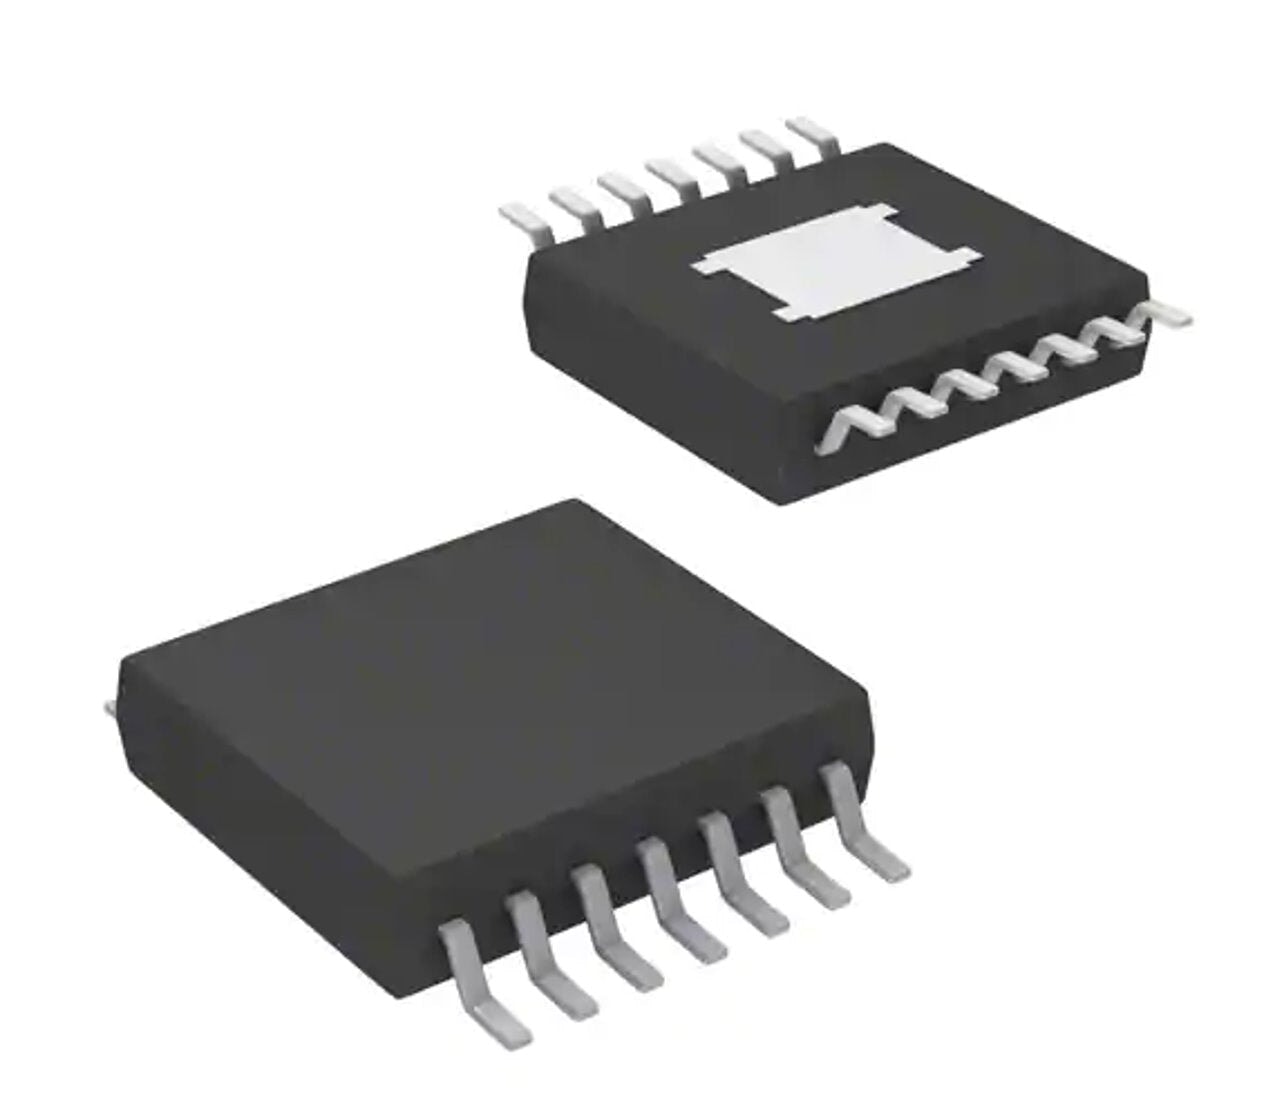 Infineon Technologies Touch Screen Controllers Part #CY7C53150-20AXI | Controller | DEX Information Technology Infineon Technologies 